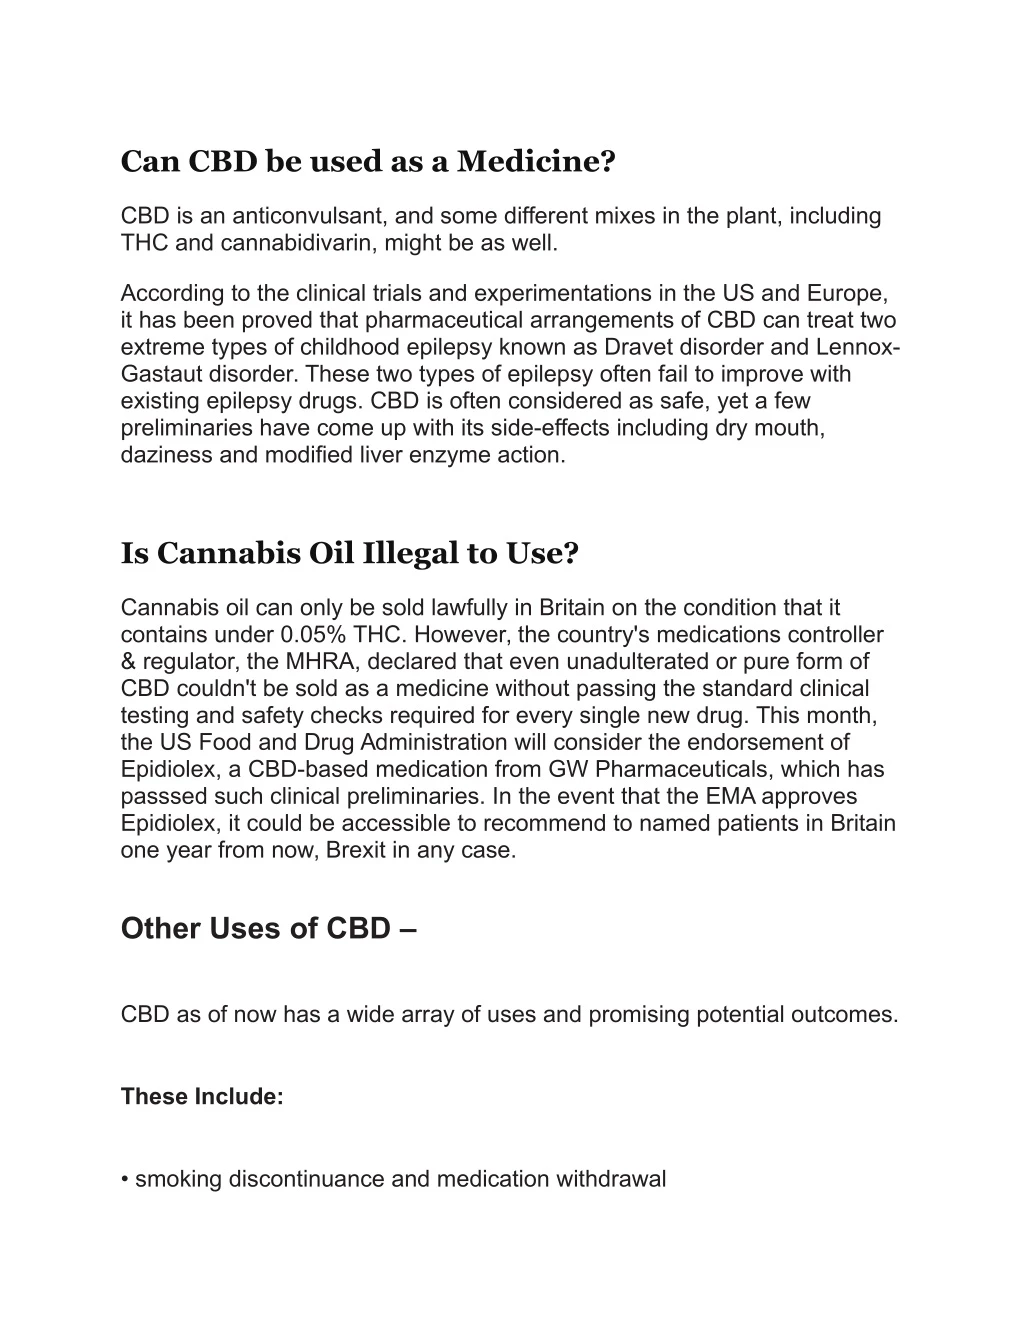 can cbd be used as a medicine n.